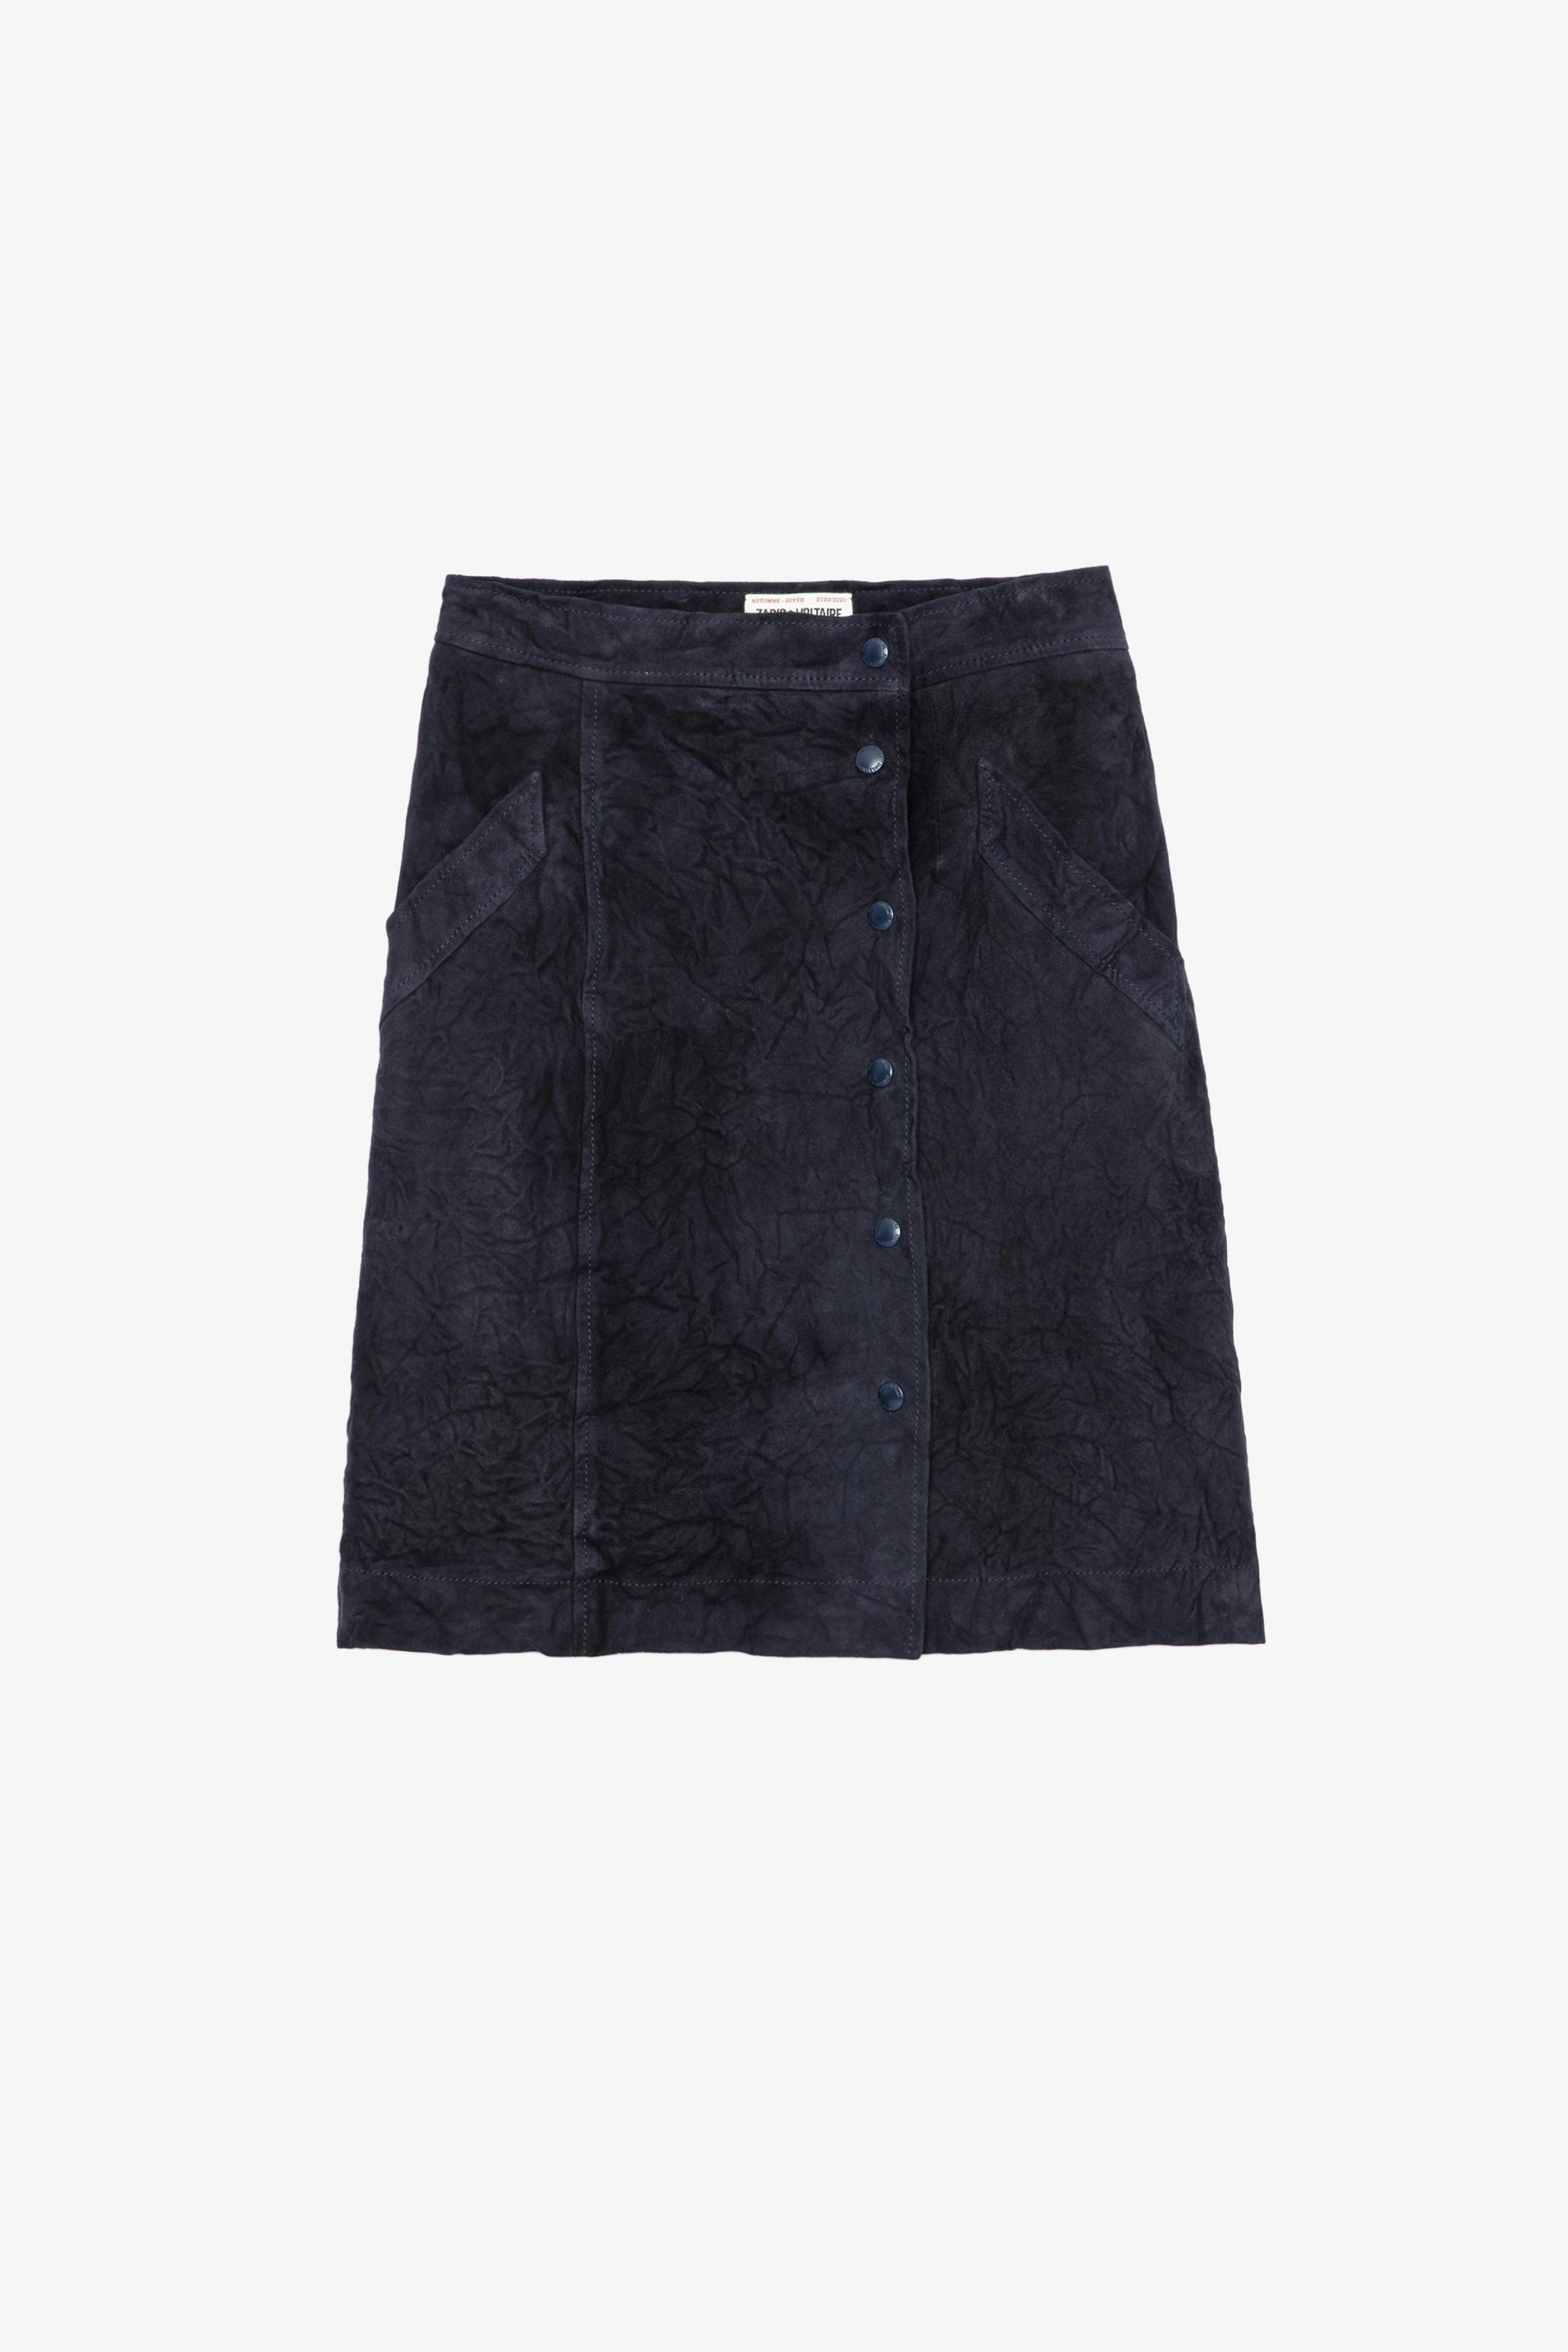 Janny Leather Skirt Women’s navy blue creased suede skirt